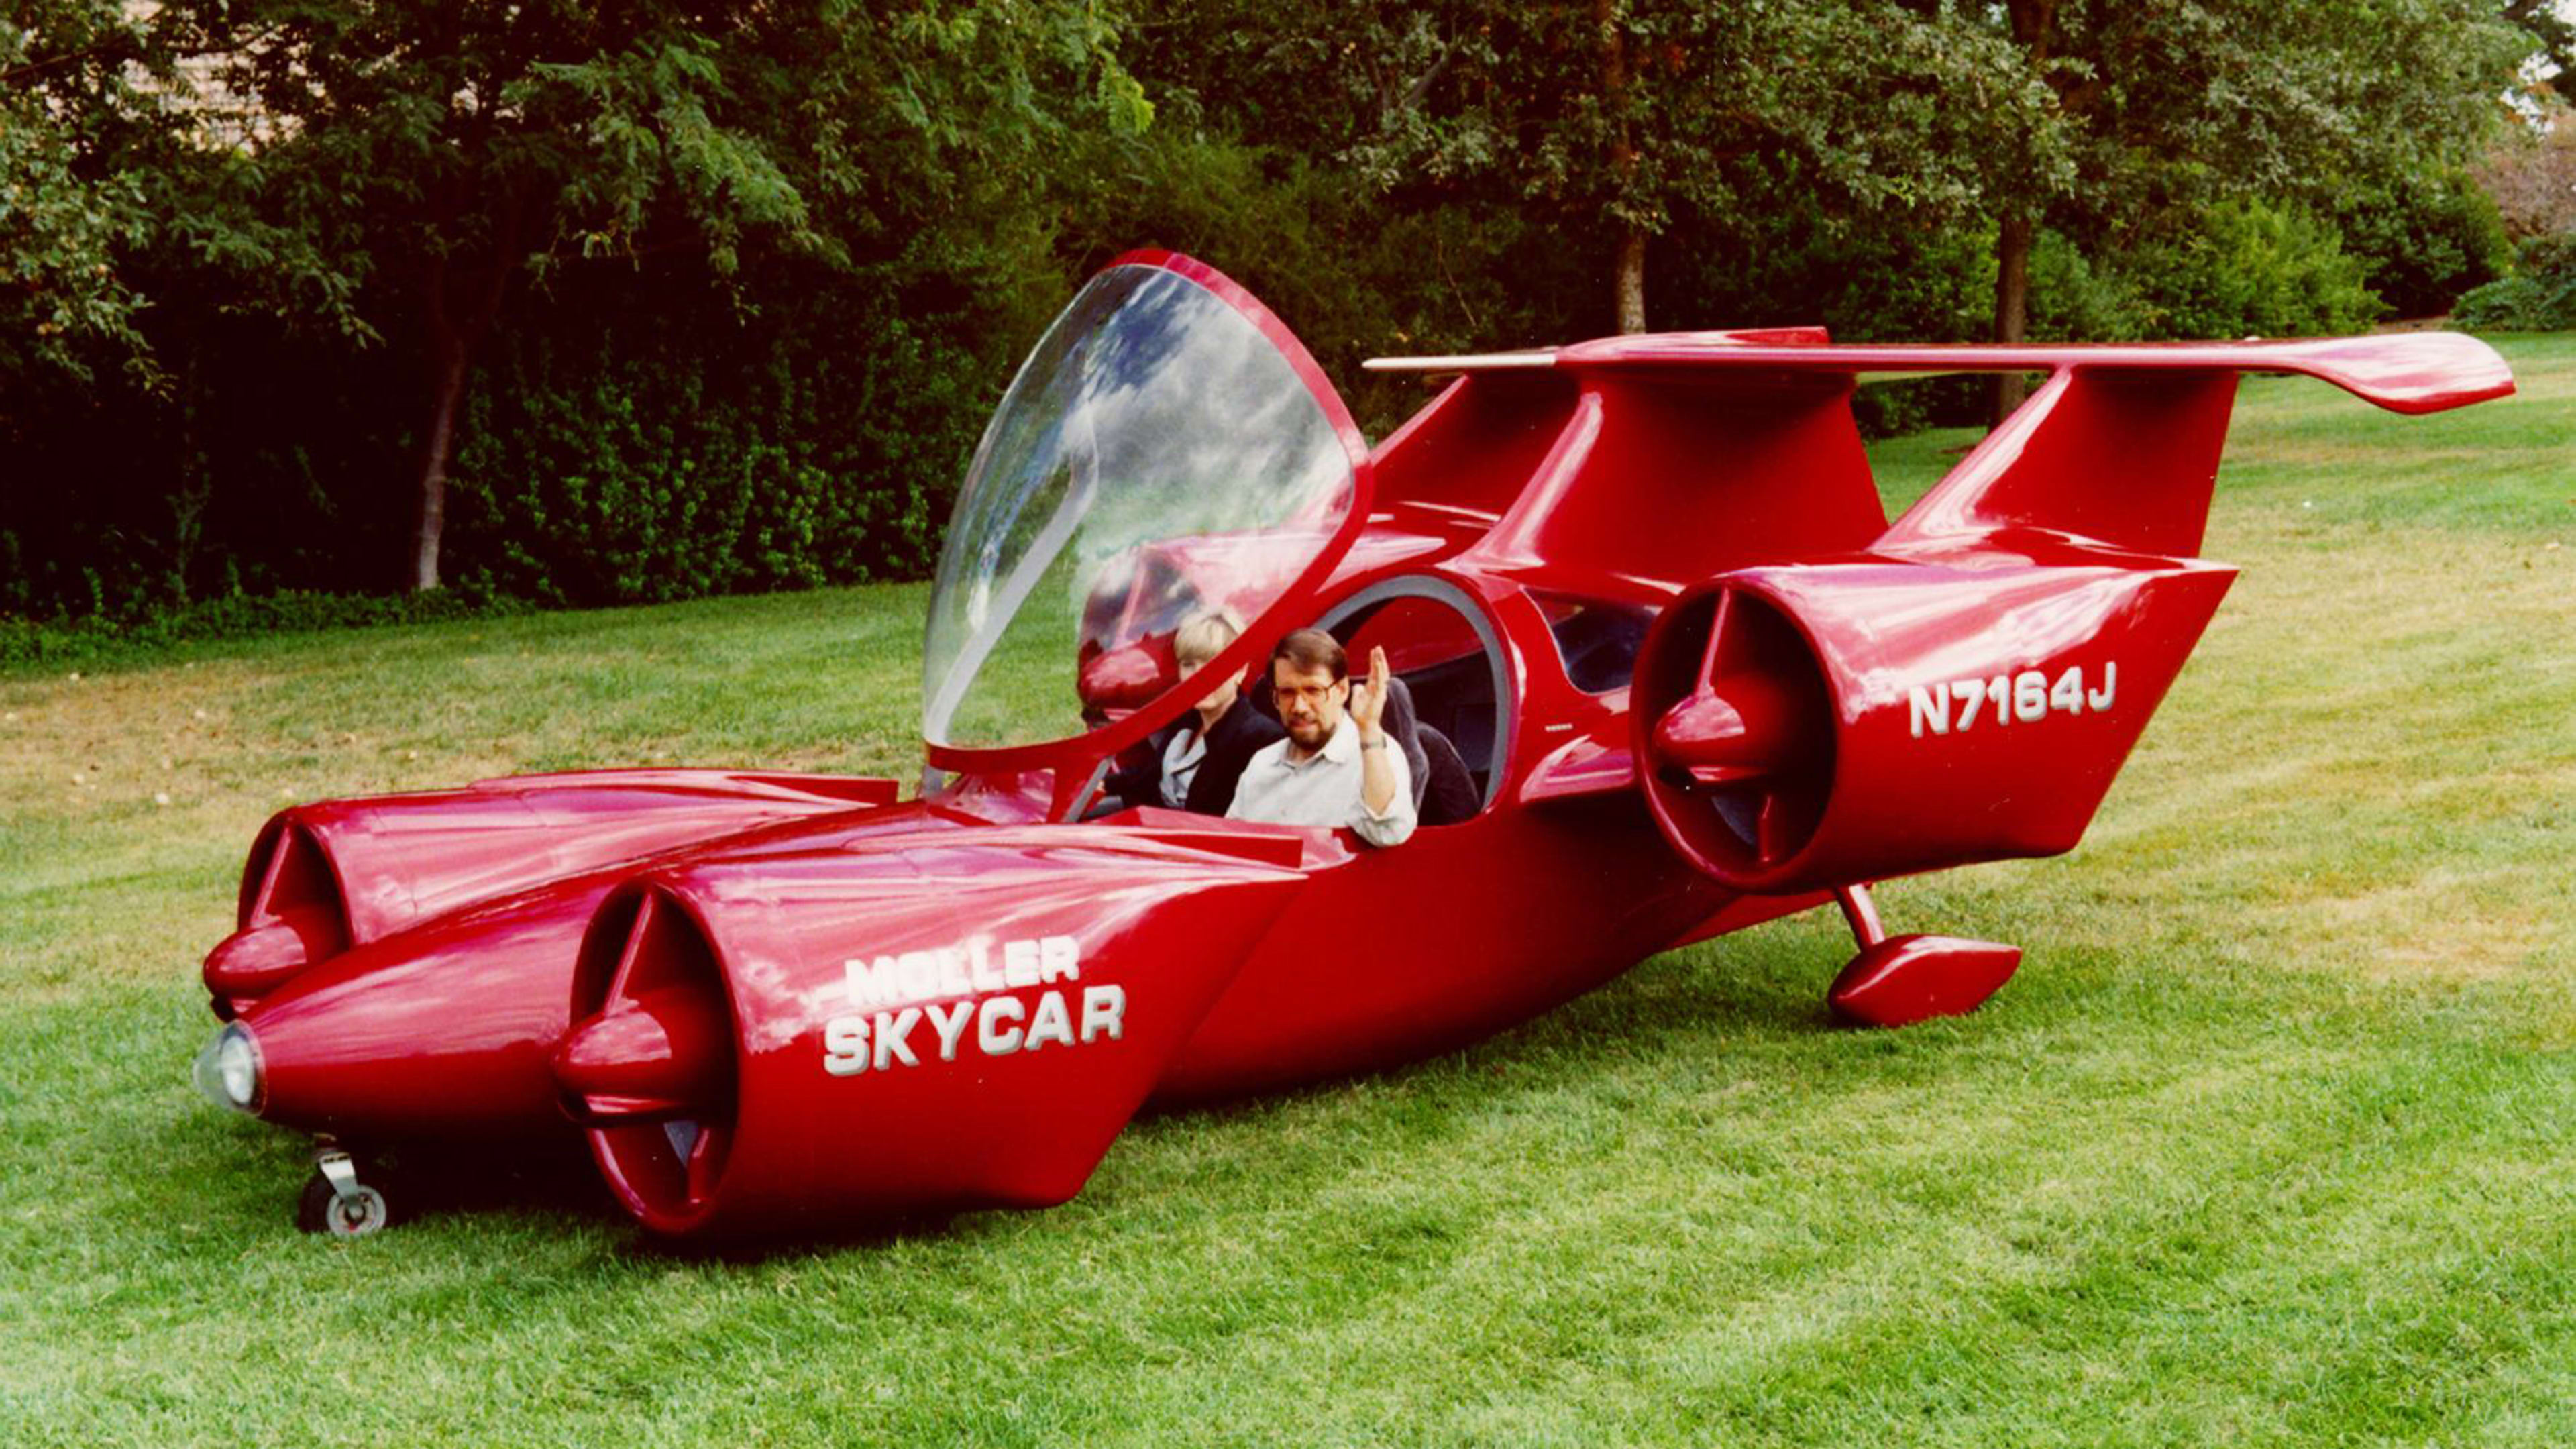 Paul Moller’s 50-year dream to build a flying car won’t die